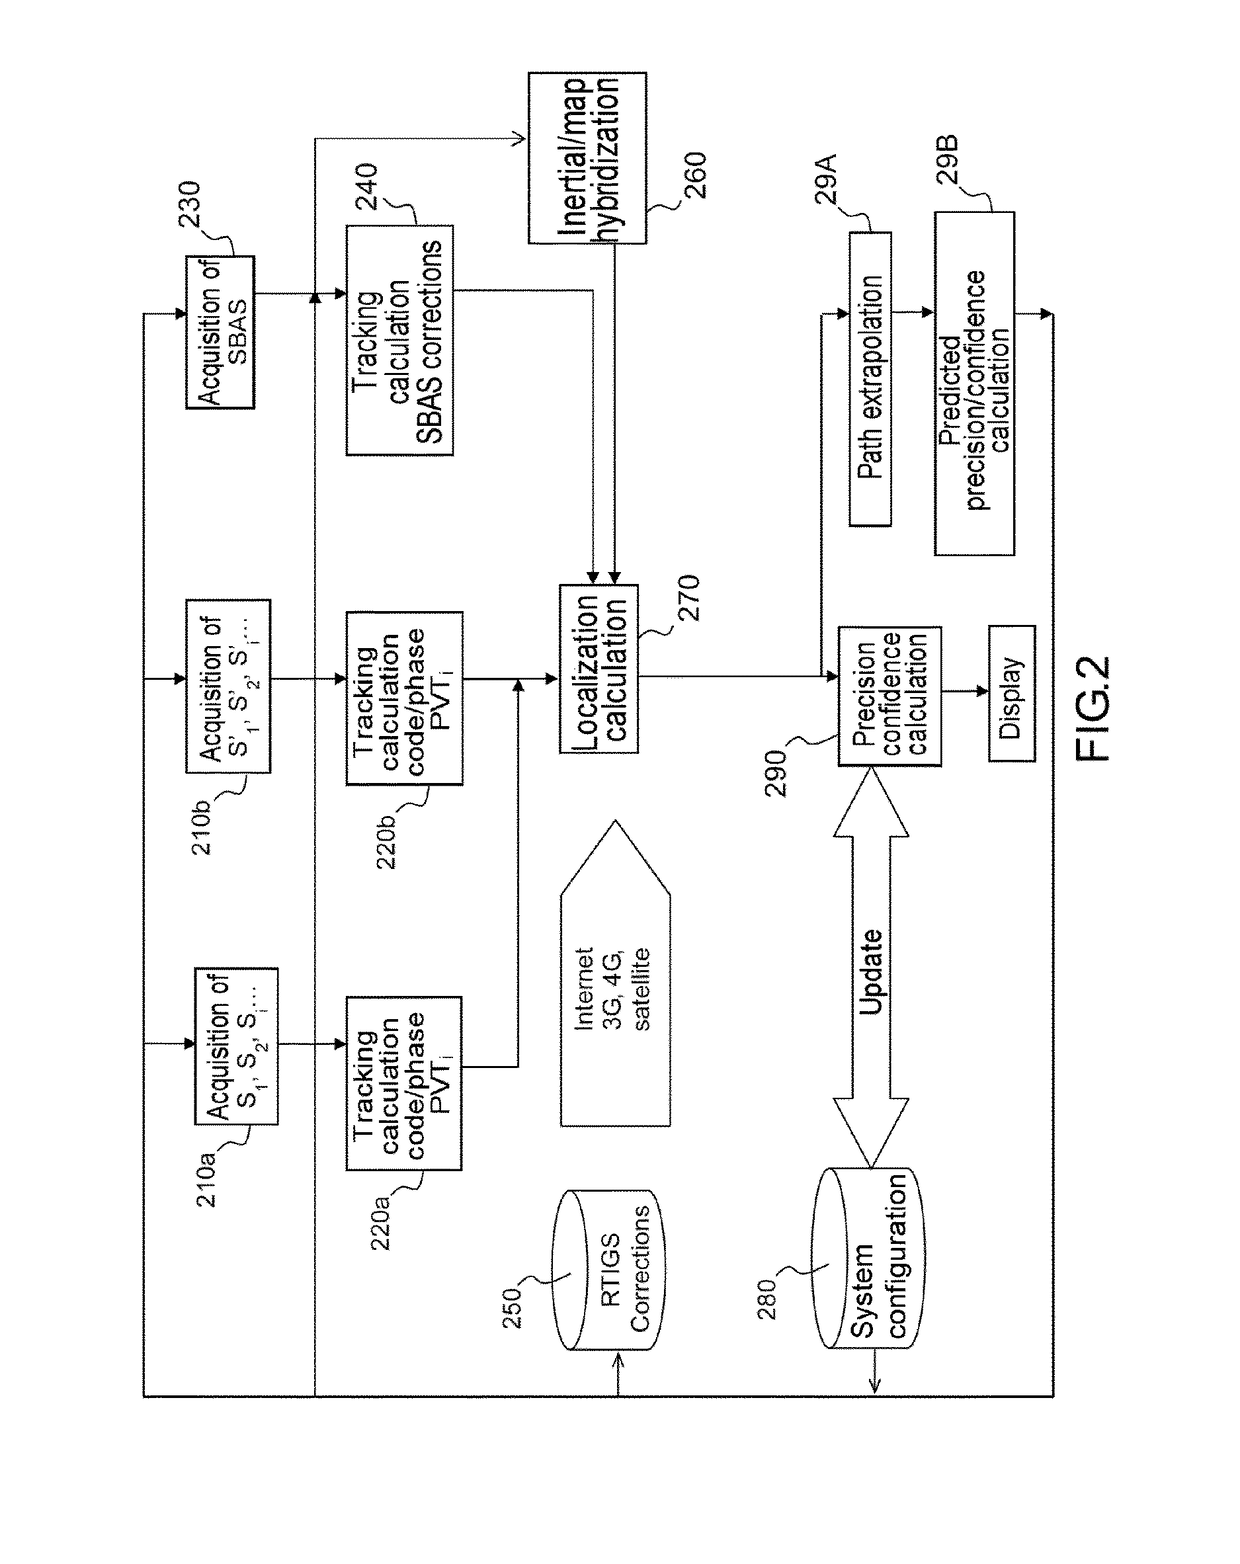 Positioning and navigation receiver with a confidence index